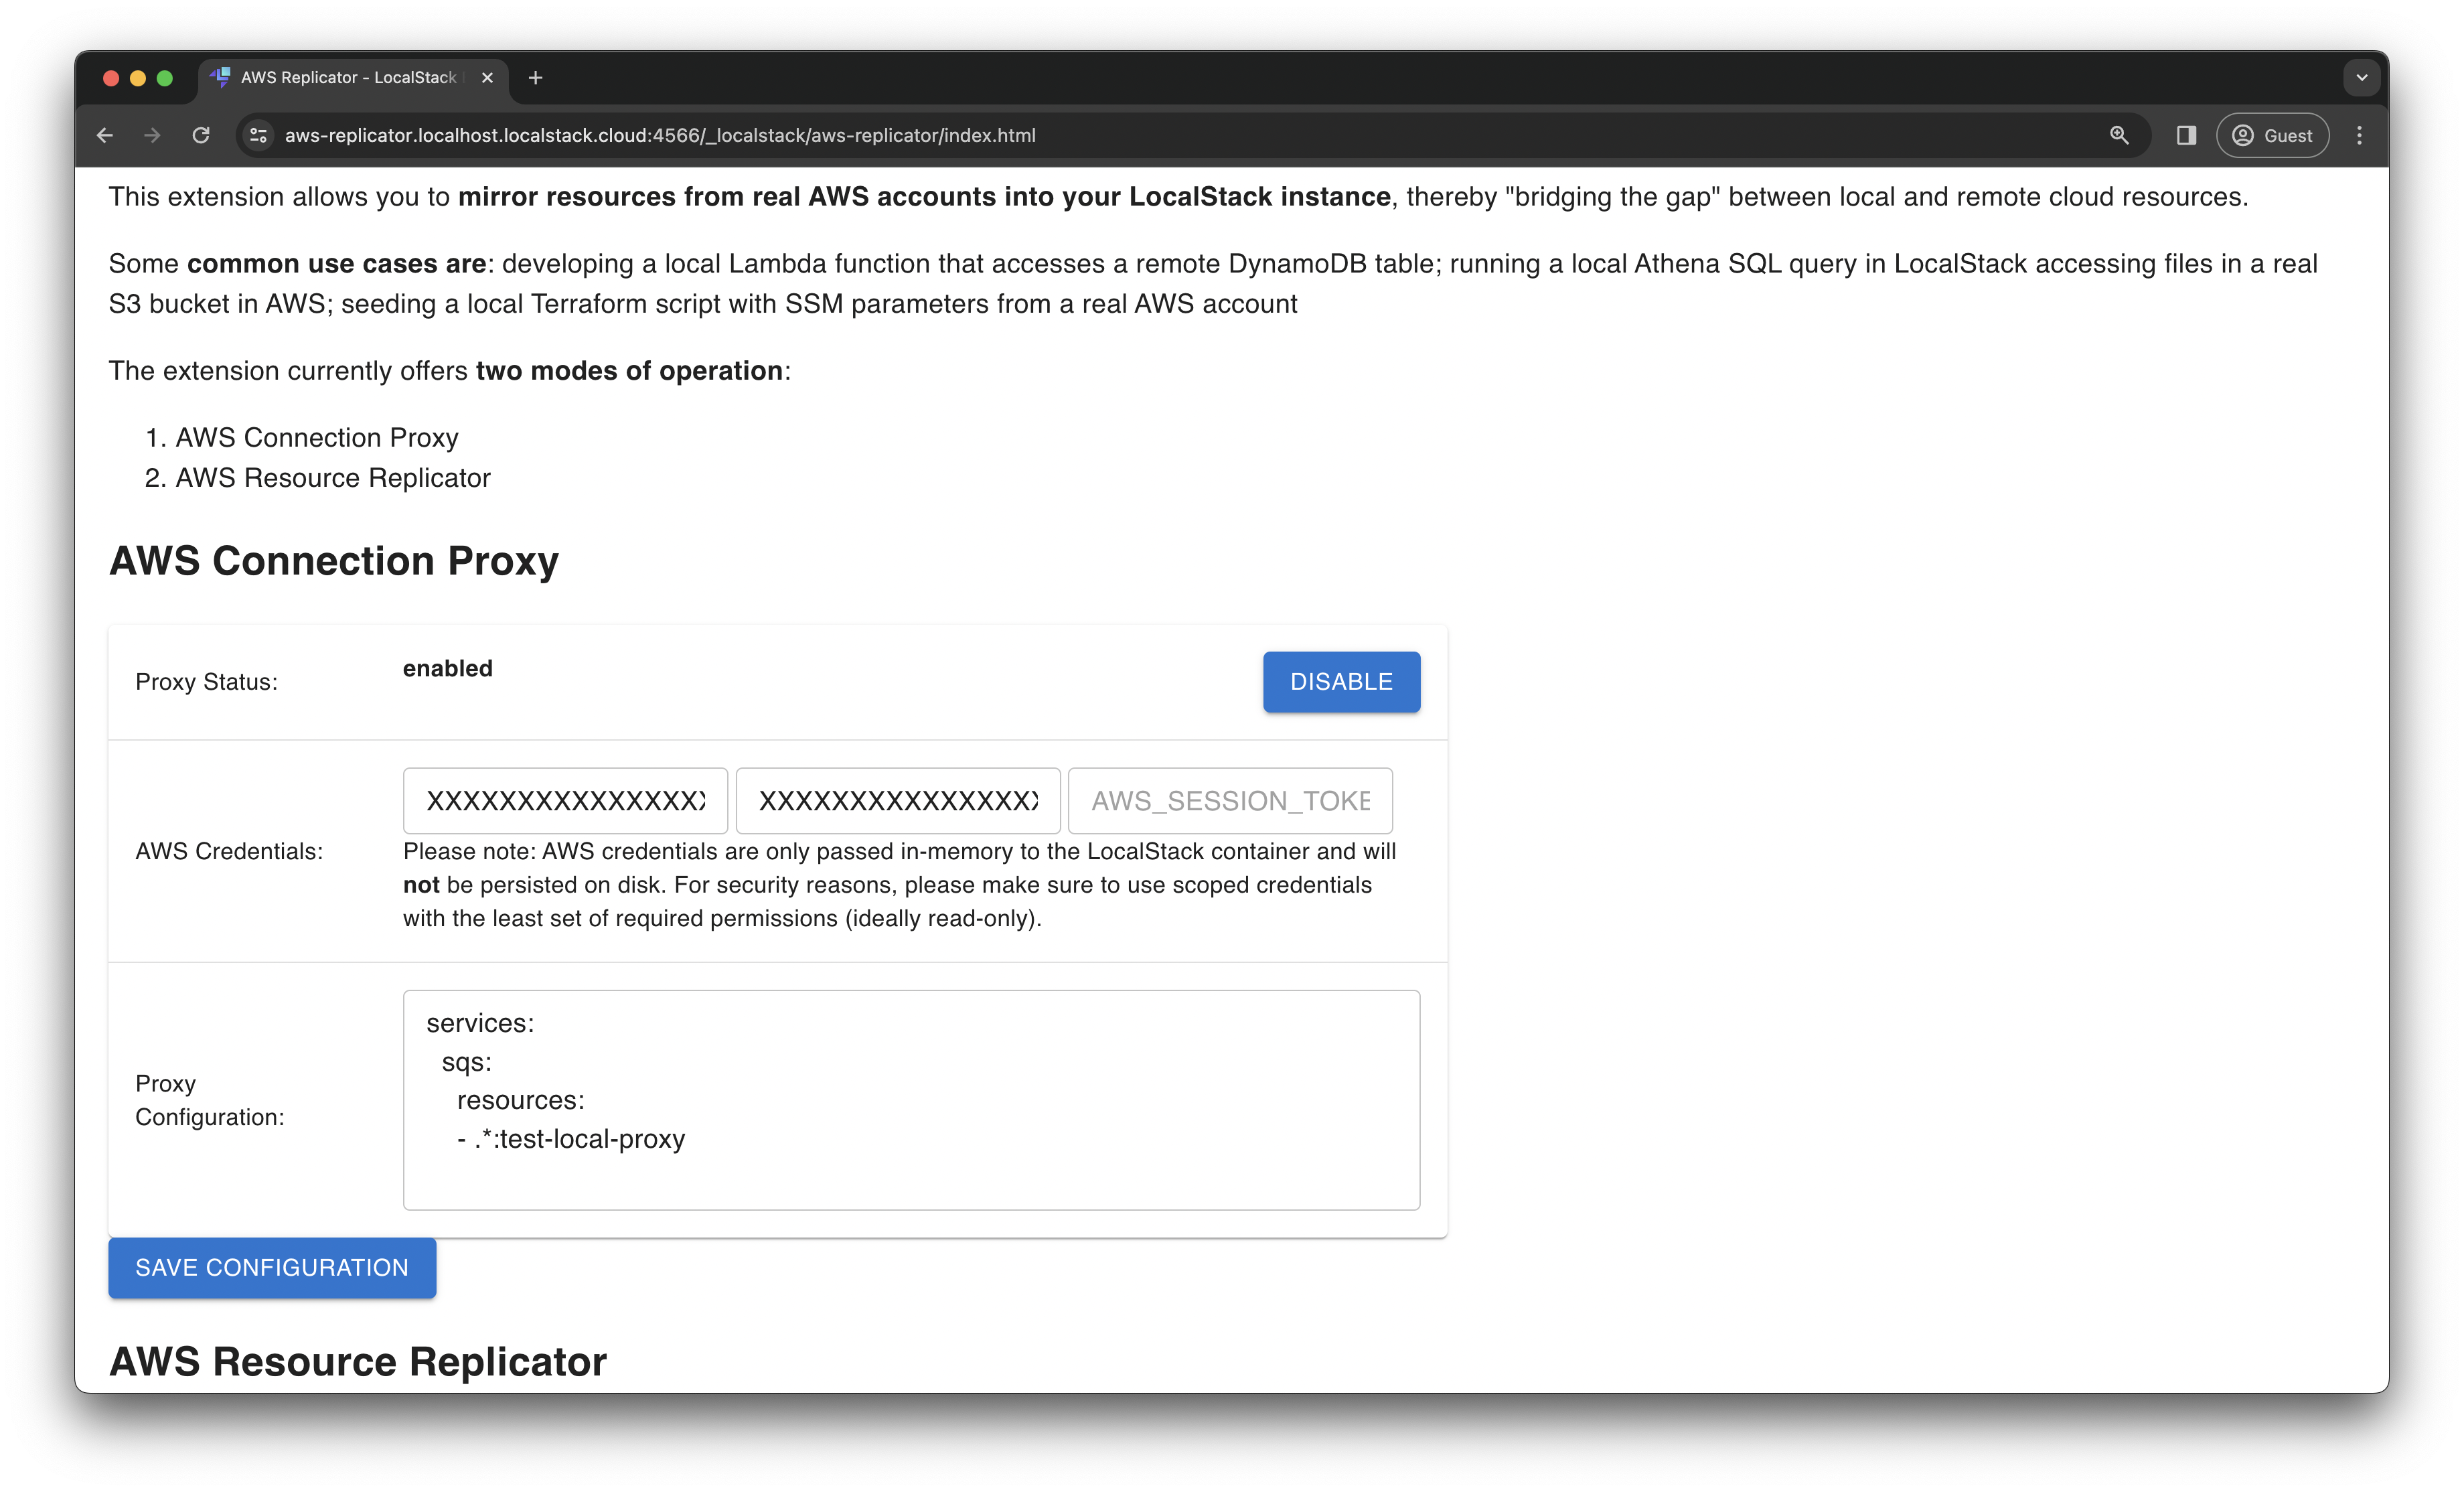 Enabled AWS Replicator extension